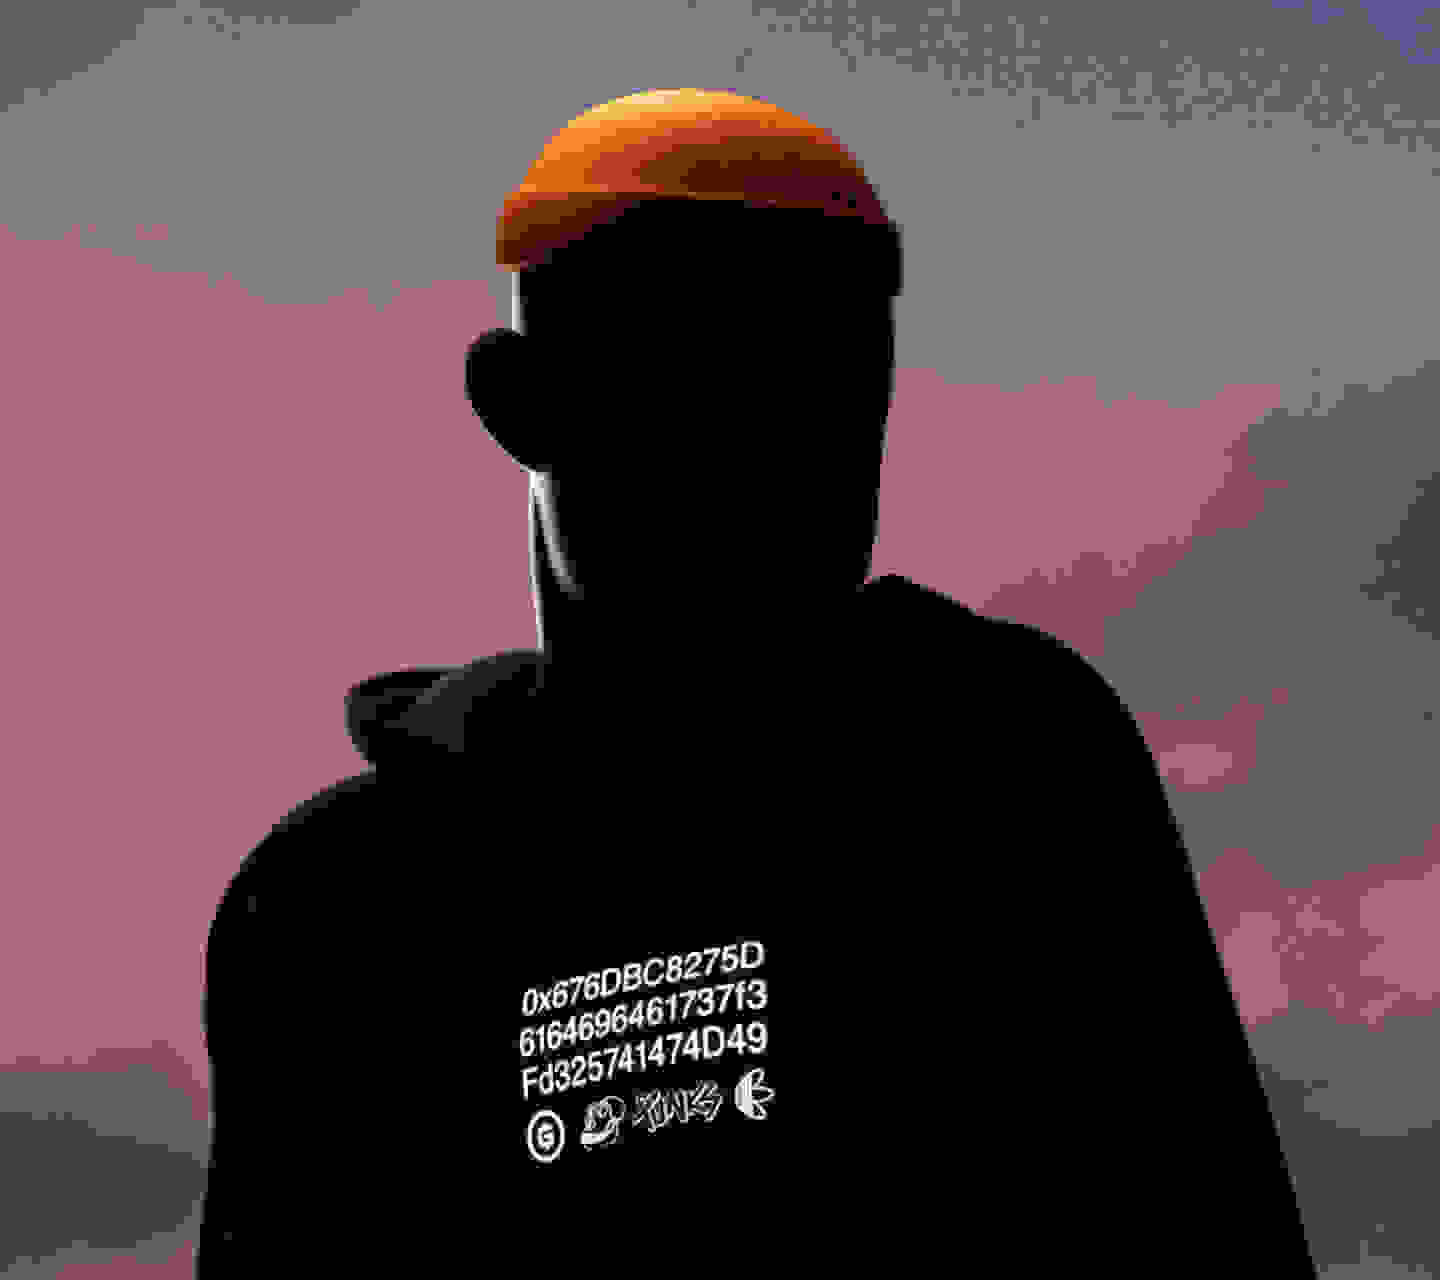 gmoney dressed in adidas apparel on a sunset background